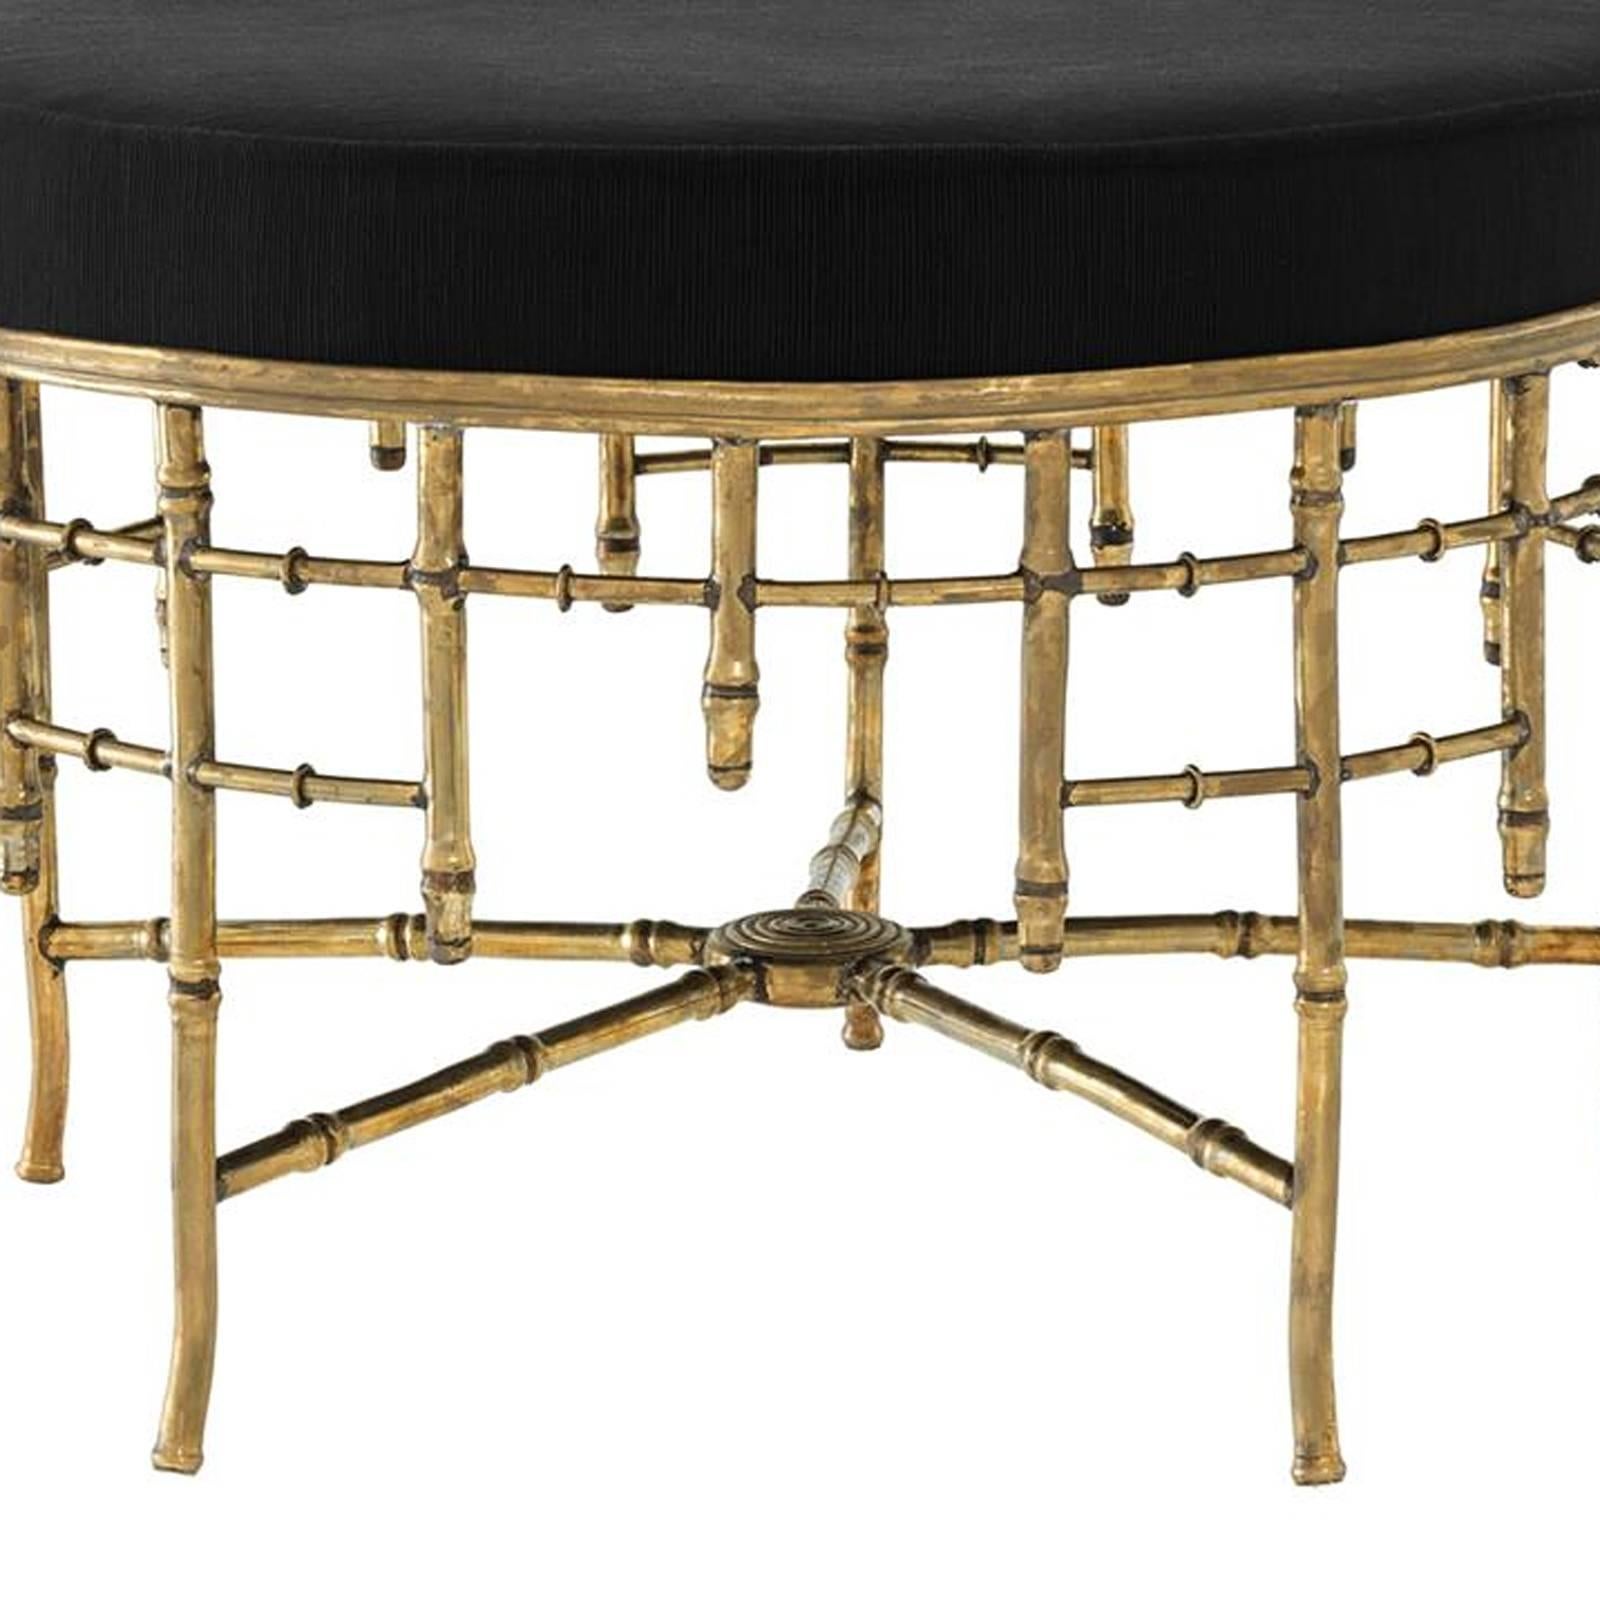 Hand-Crafted Reed Large Stool in Vintage Brass Finish and Black Velvet Seat